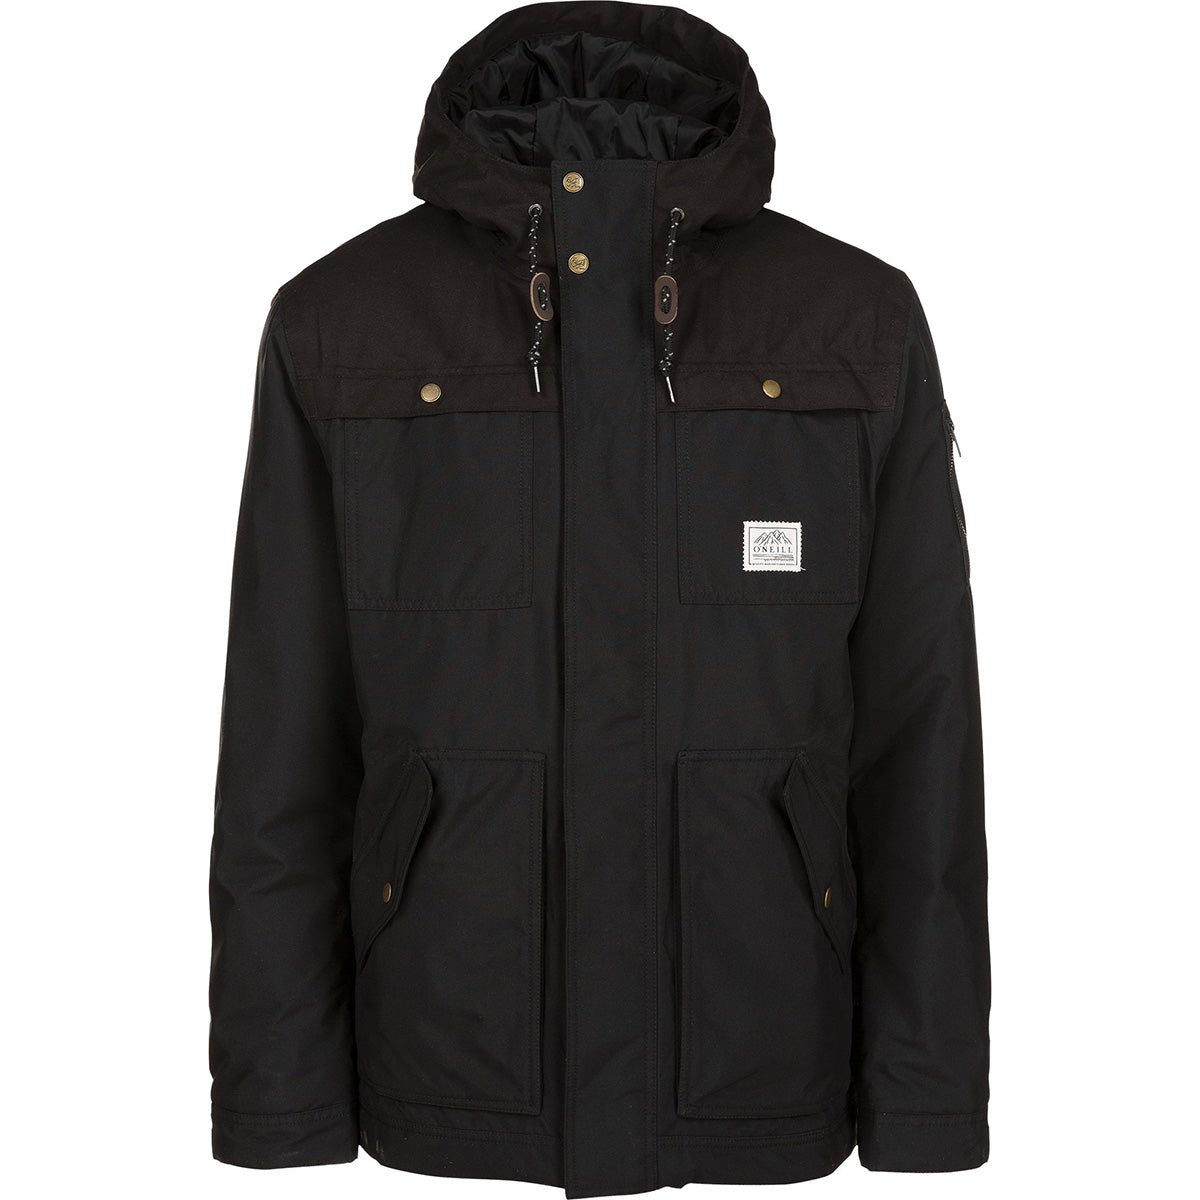 O'Neill Utility Men's Snow Jackets - Black Out